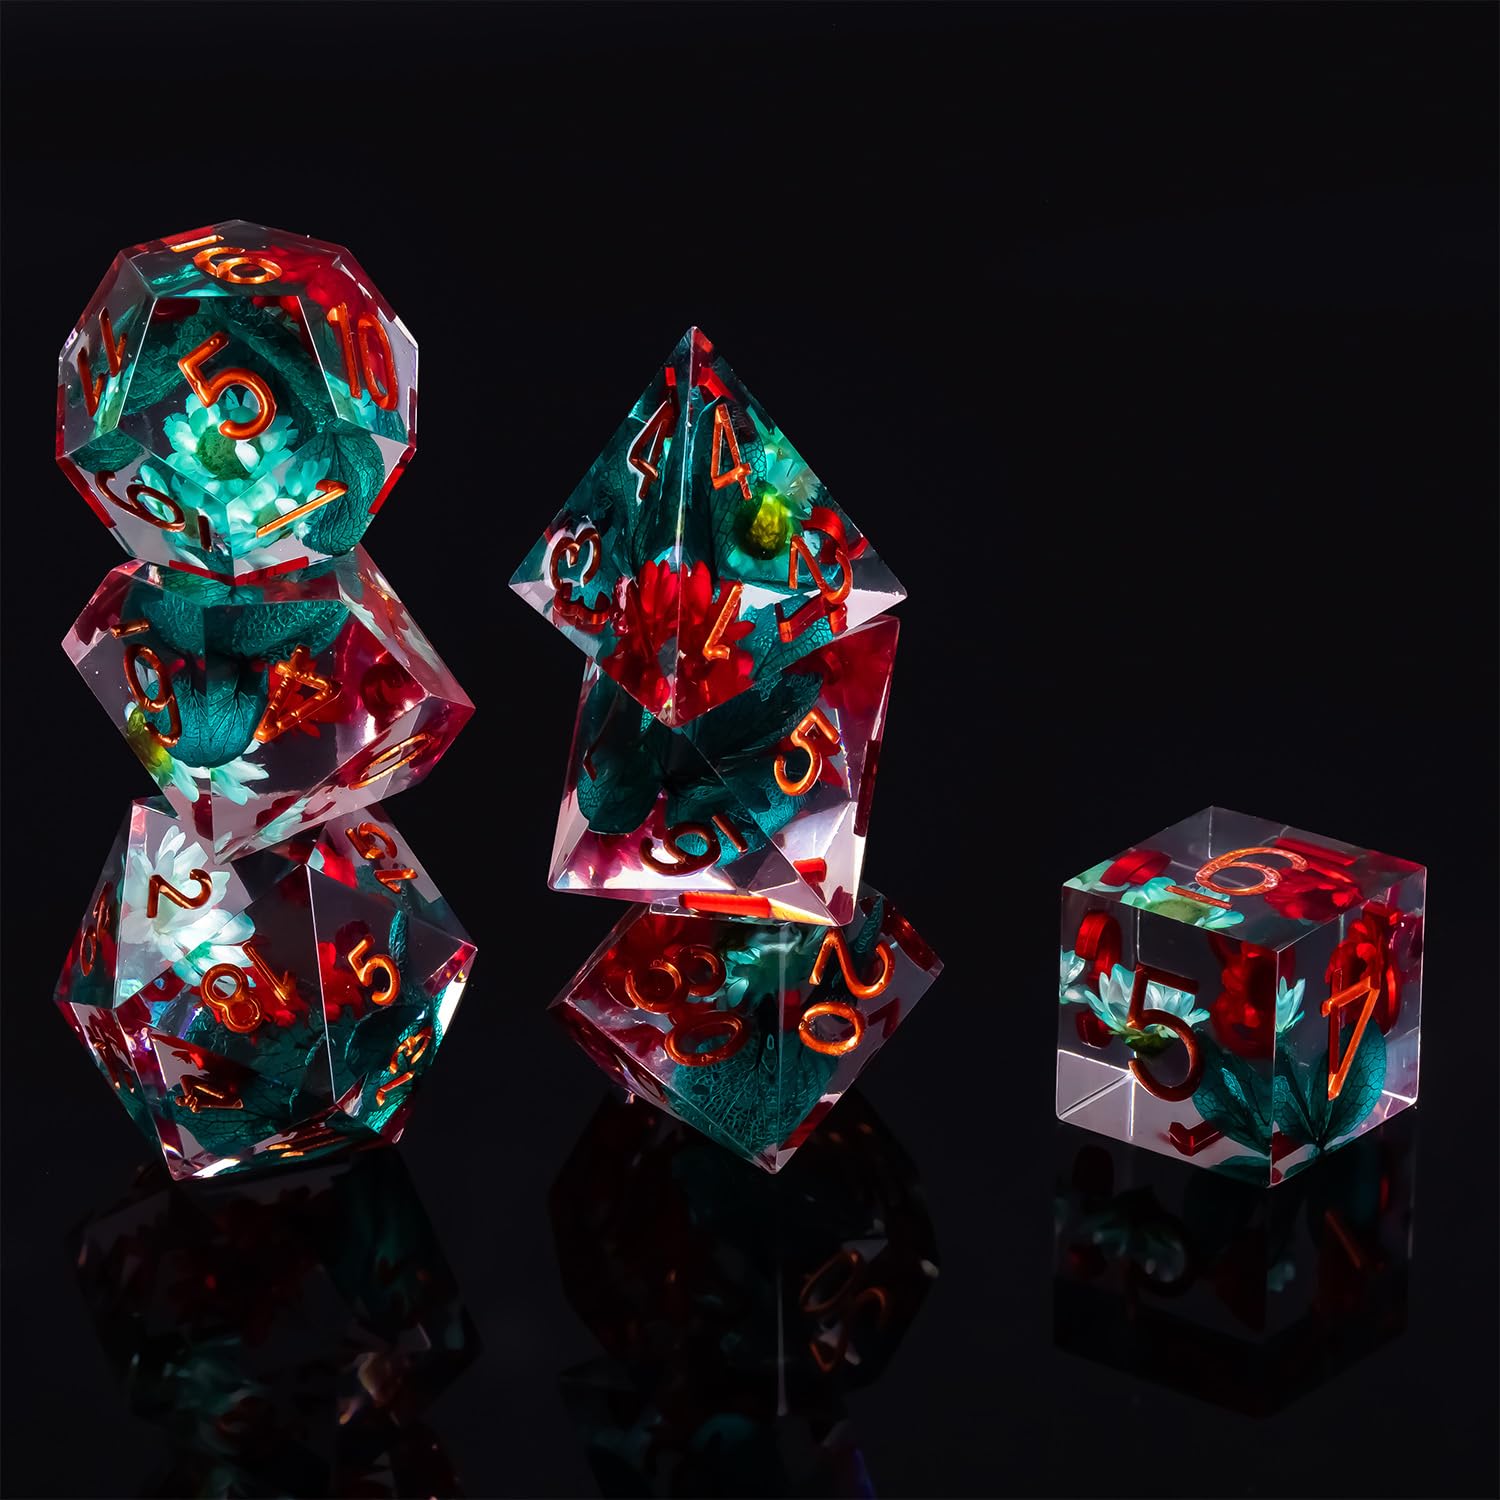 DND Sharp Edge Dice Set, 7 Piece Resin Dice Set, Polyhedral Dice Set for Dungeons and Dragons Dice,D&D Dice Set, RPG Role Playing D and D Dice D20 D12 D10 D8 D6 D4 with Gift Box (Red Flowers)